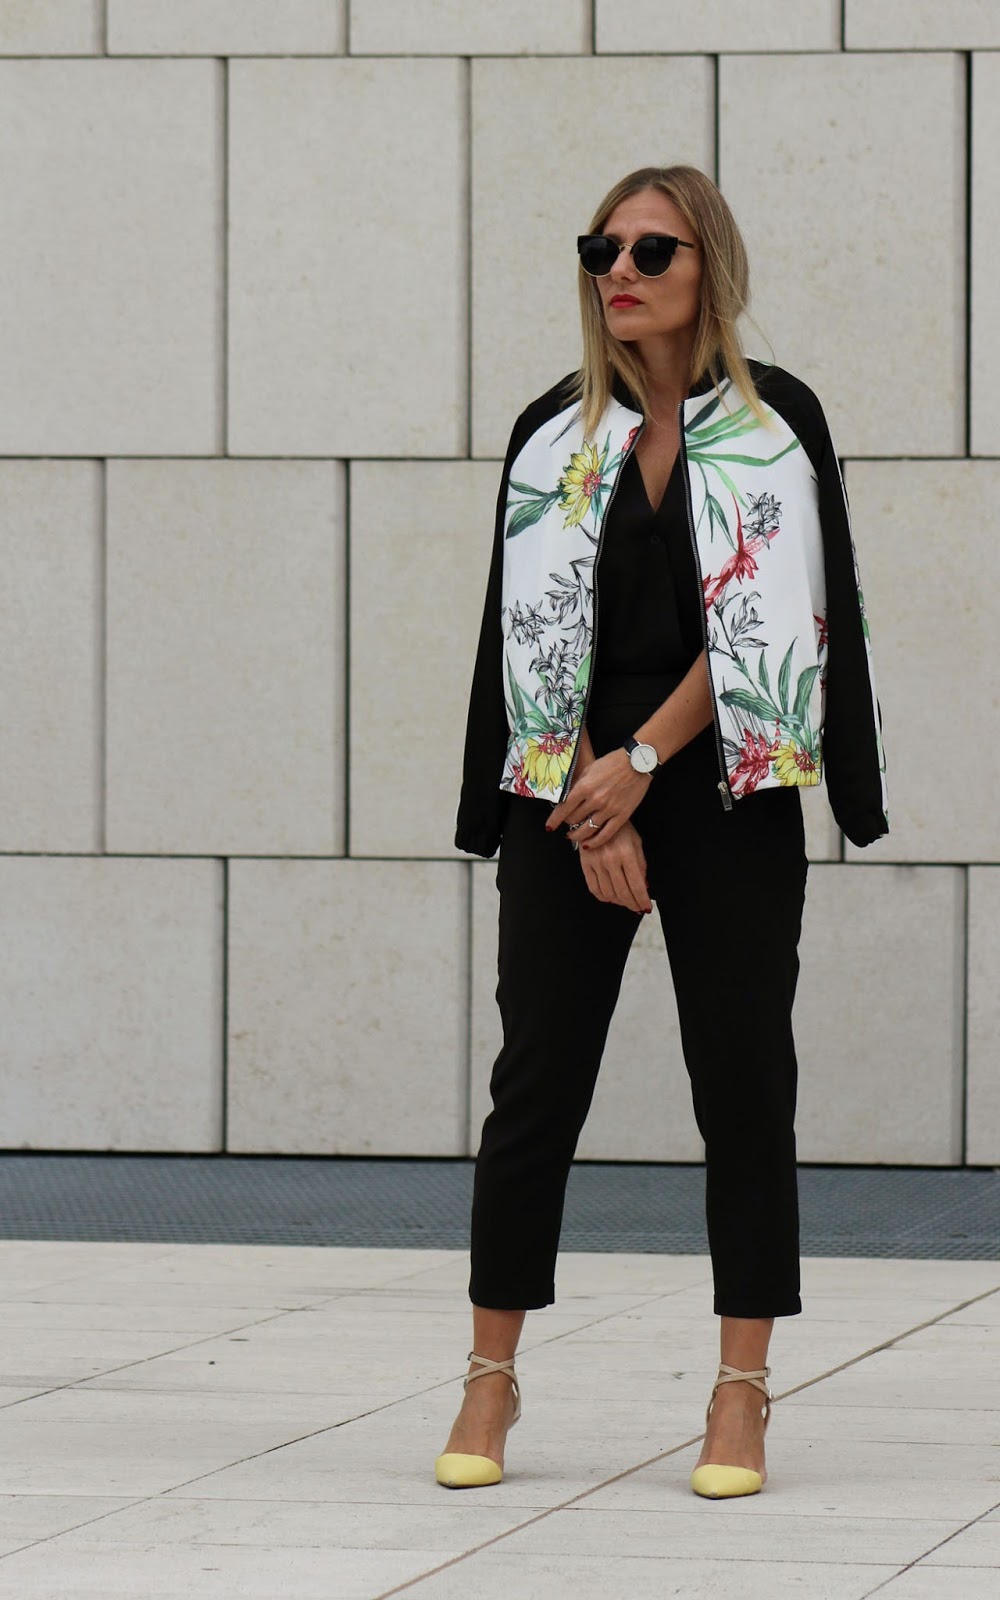 Eniwhere Fashion - Zaful - Black jumpsuit and floral bomber